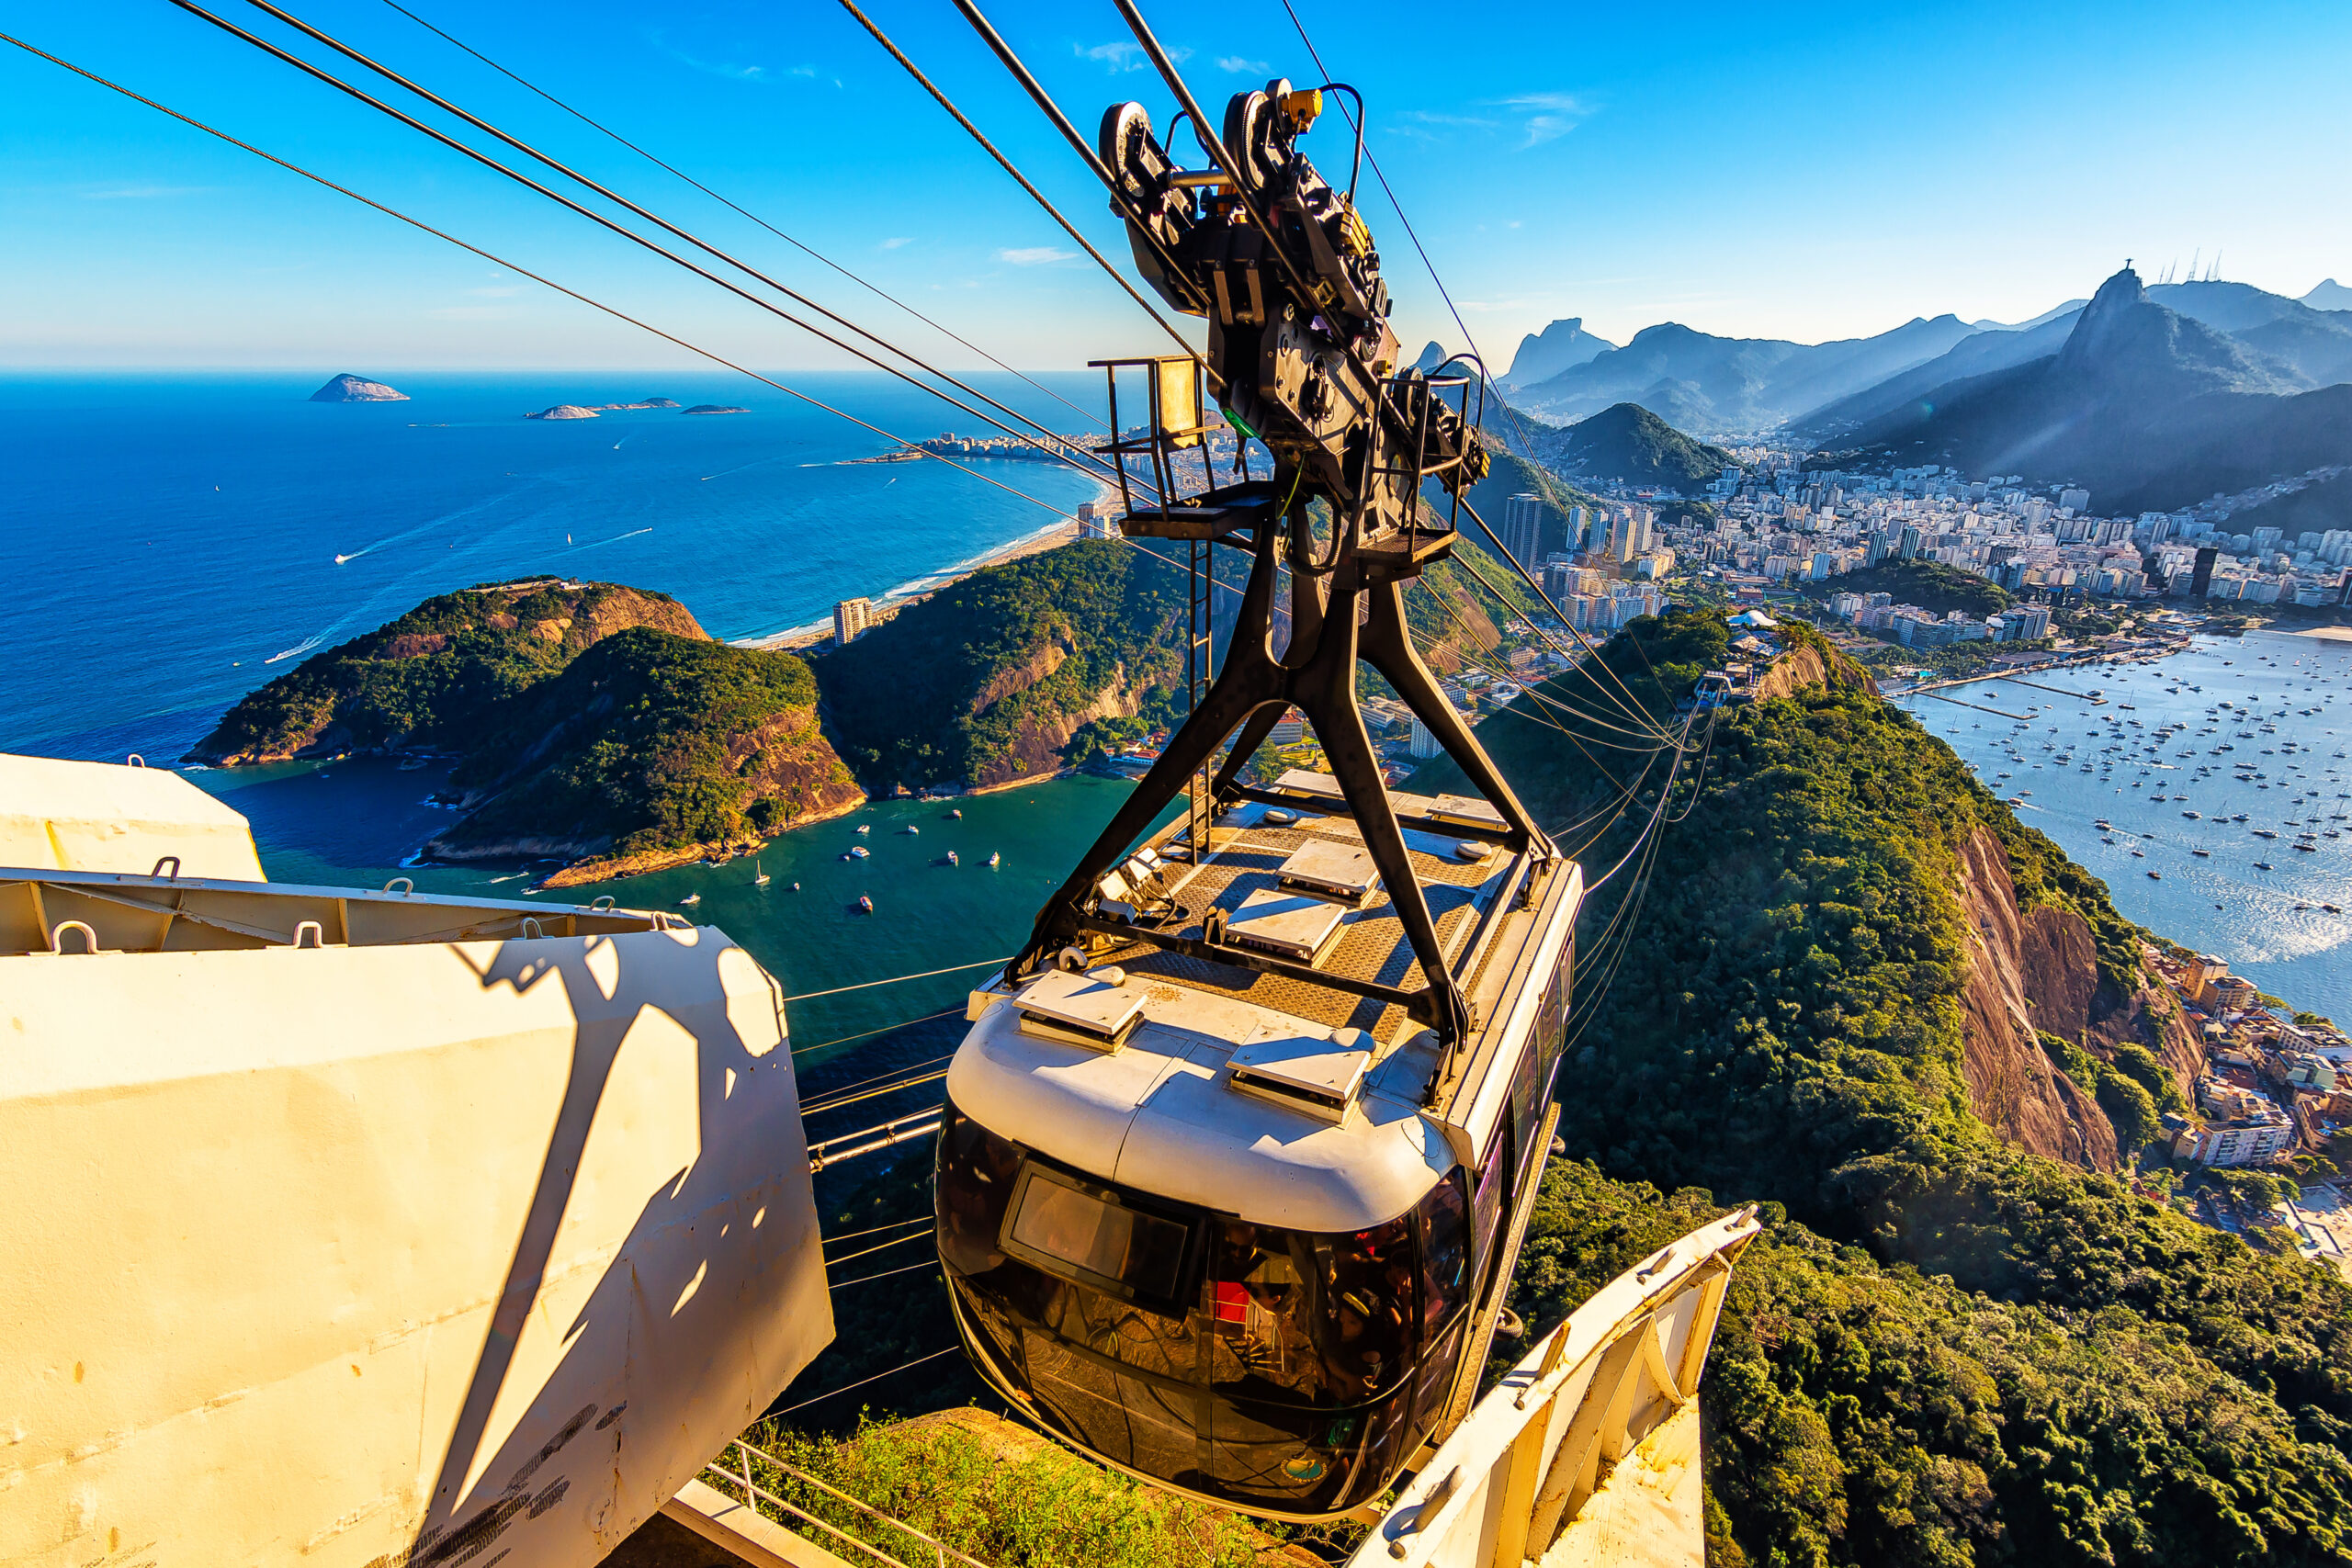 A cable car ascends toward the summit of a mountain overlooking a coastal city with sprawling urban areas, verdant hills, and expansive blue seas. Sunlight bathes the scene, highlighting the natural beauty and vibrant colors of the landscape.